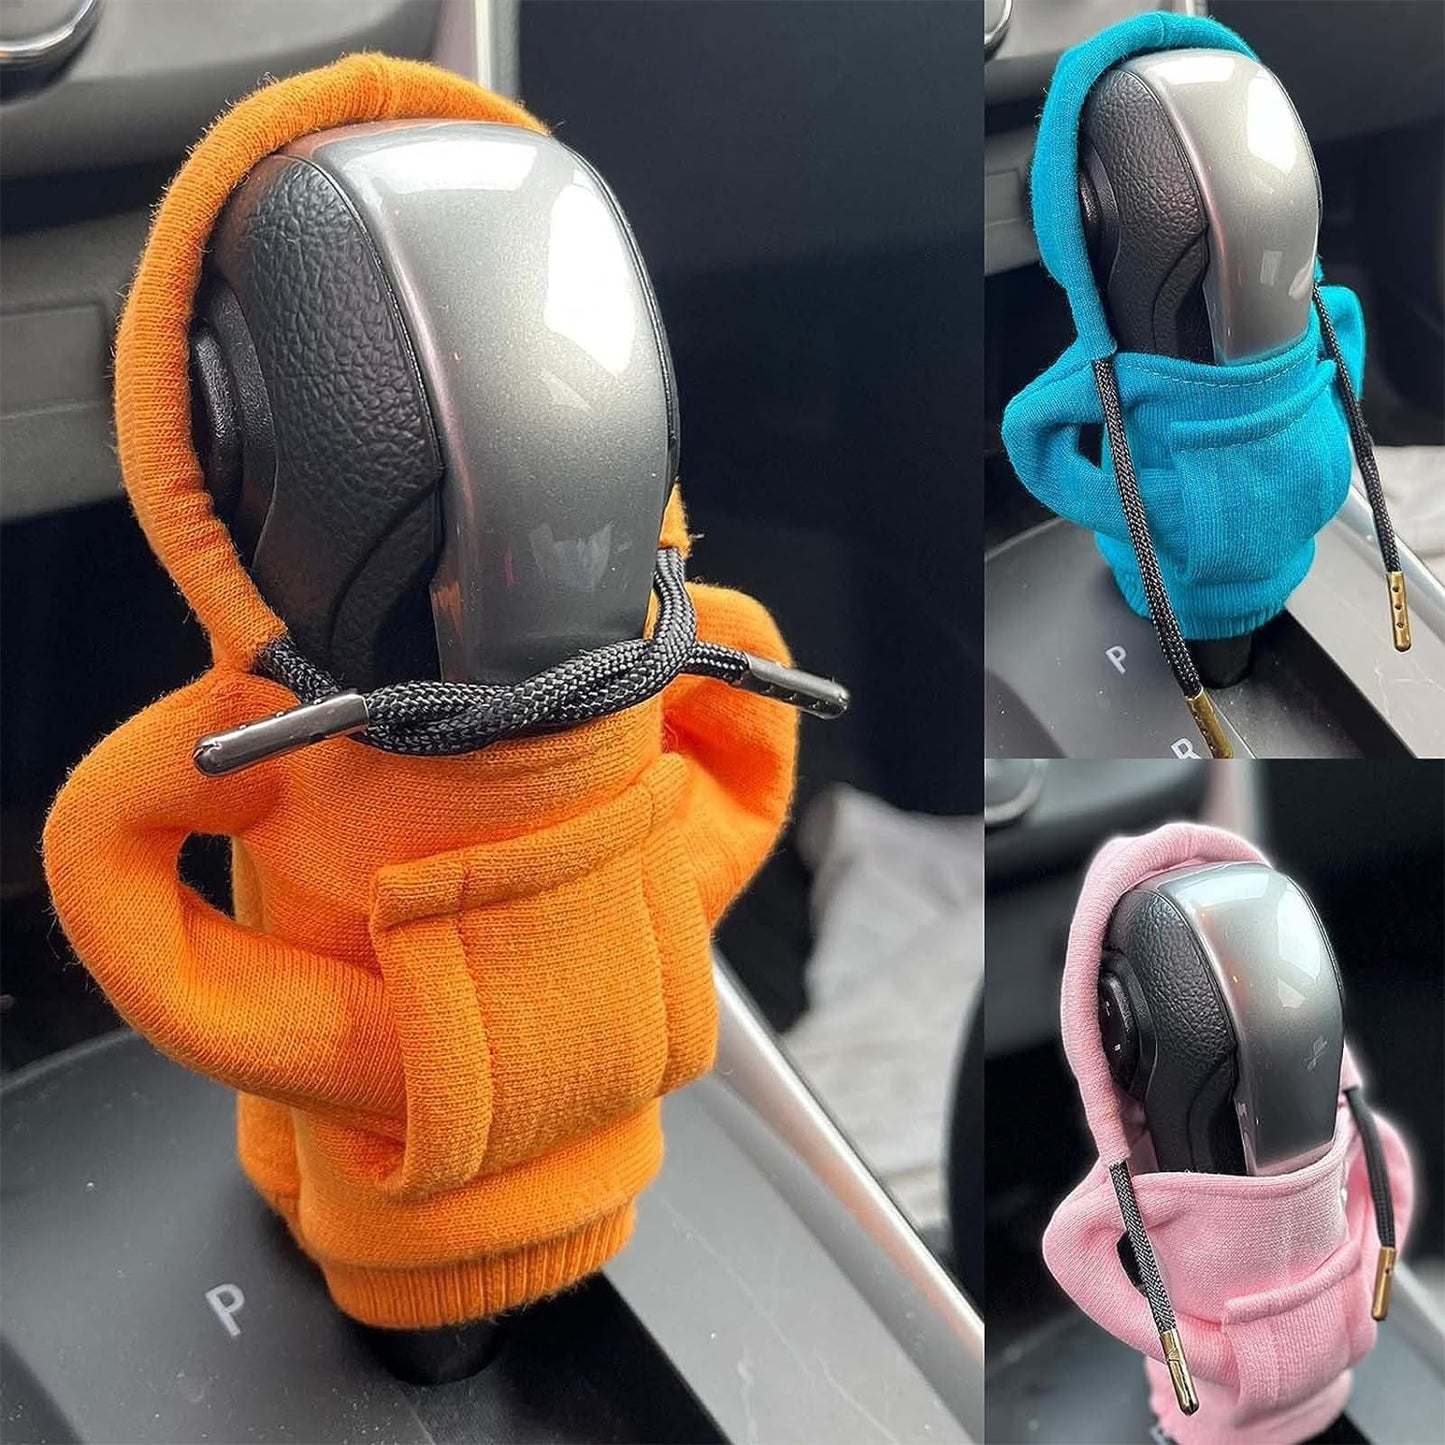 ZKKZKK Car Gear Shift Cover Hoodie: Fashionable Hooded Shirt for Your Shifter